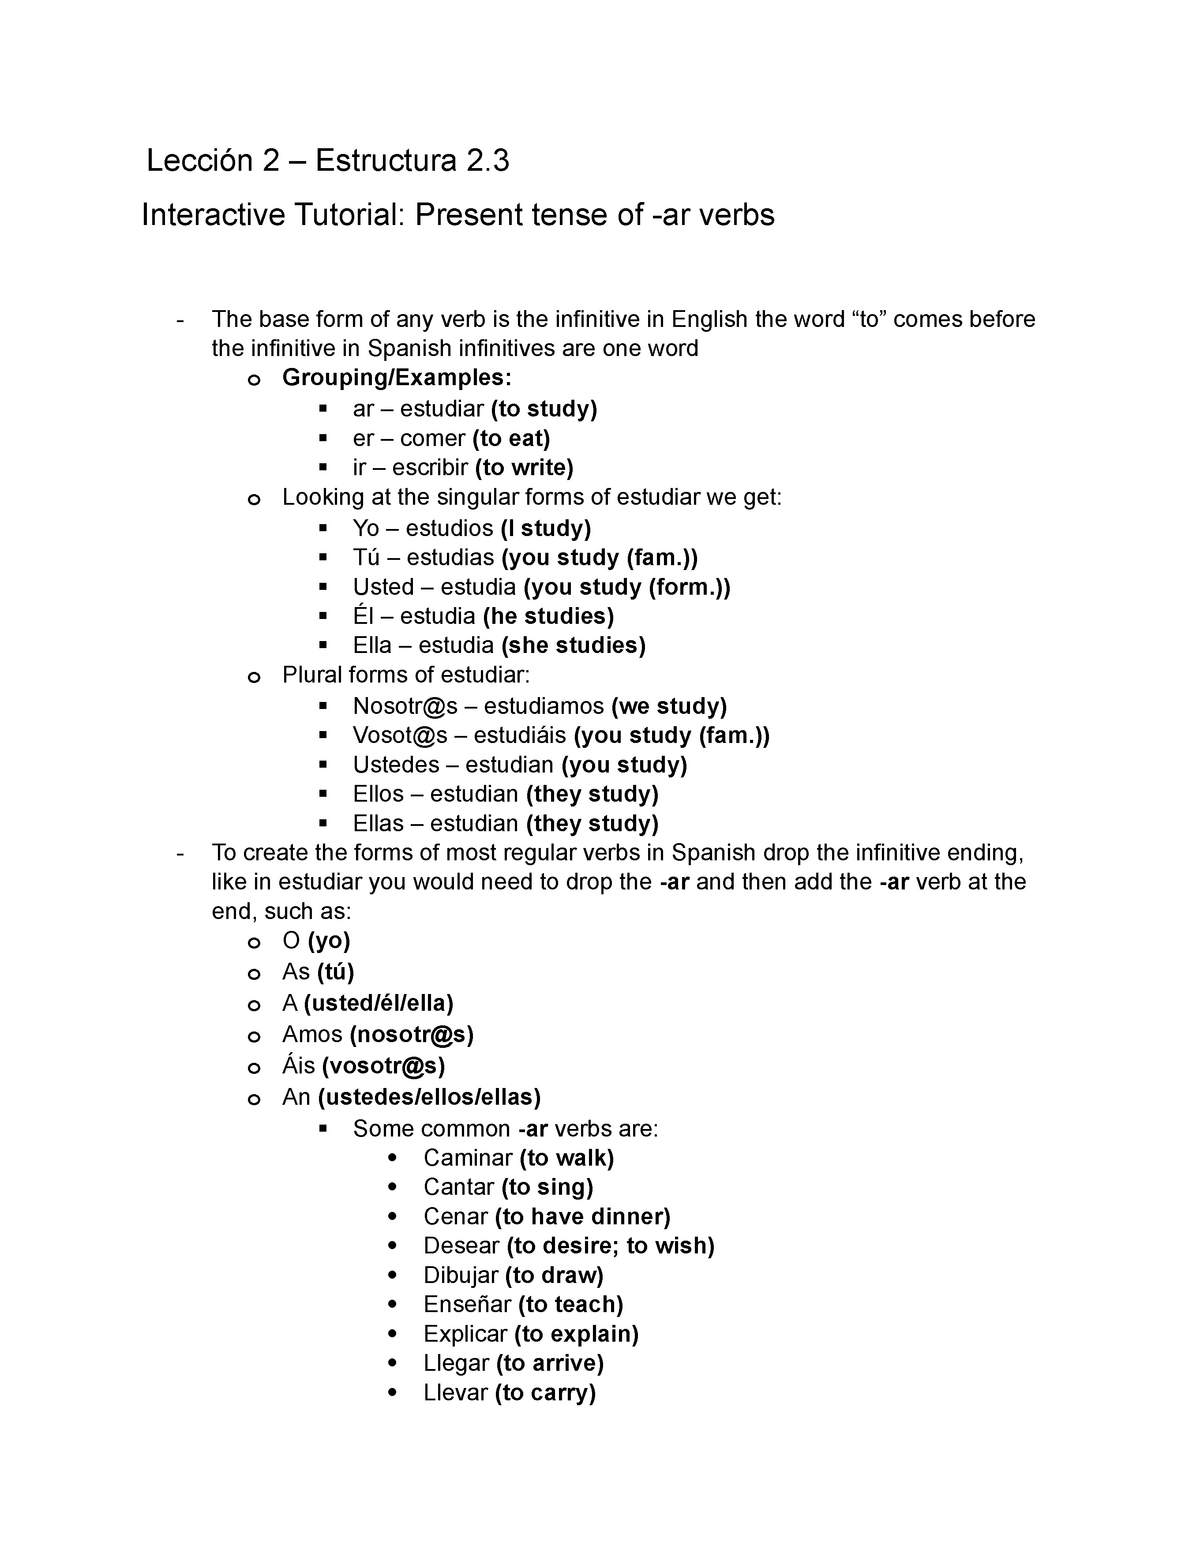 Lecc on 2 Estructura 2 1 Tutorial Notes On Present Tense Of ar Verbs In Spanish Lecci n 2